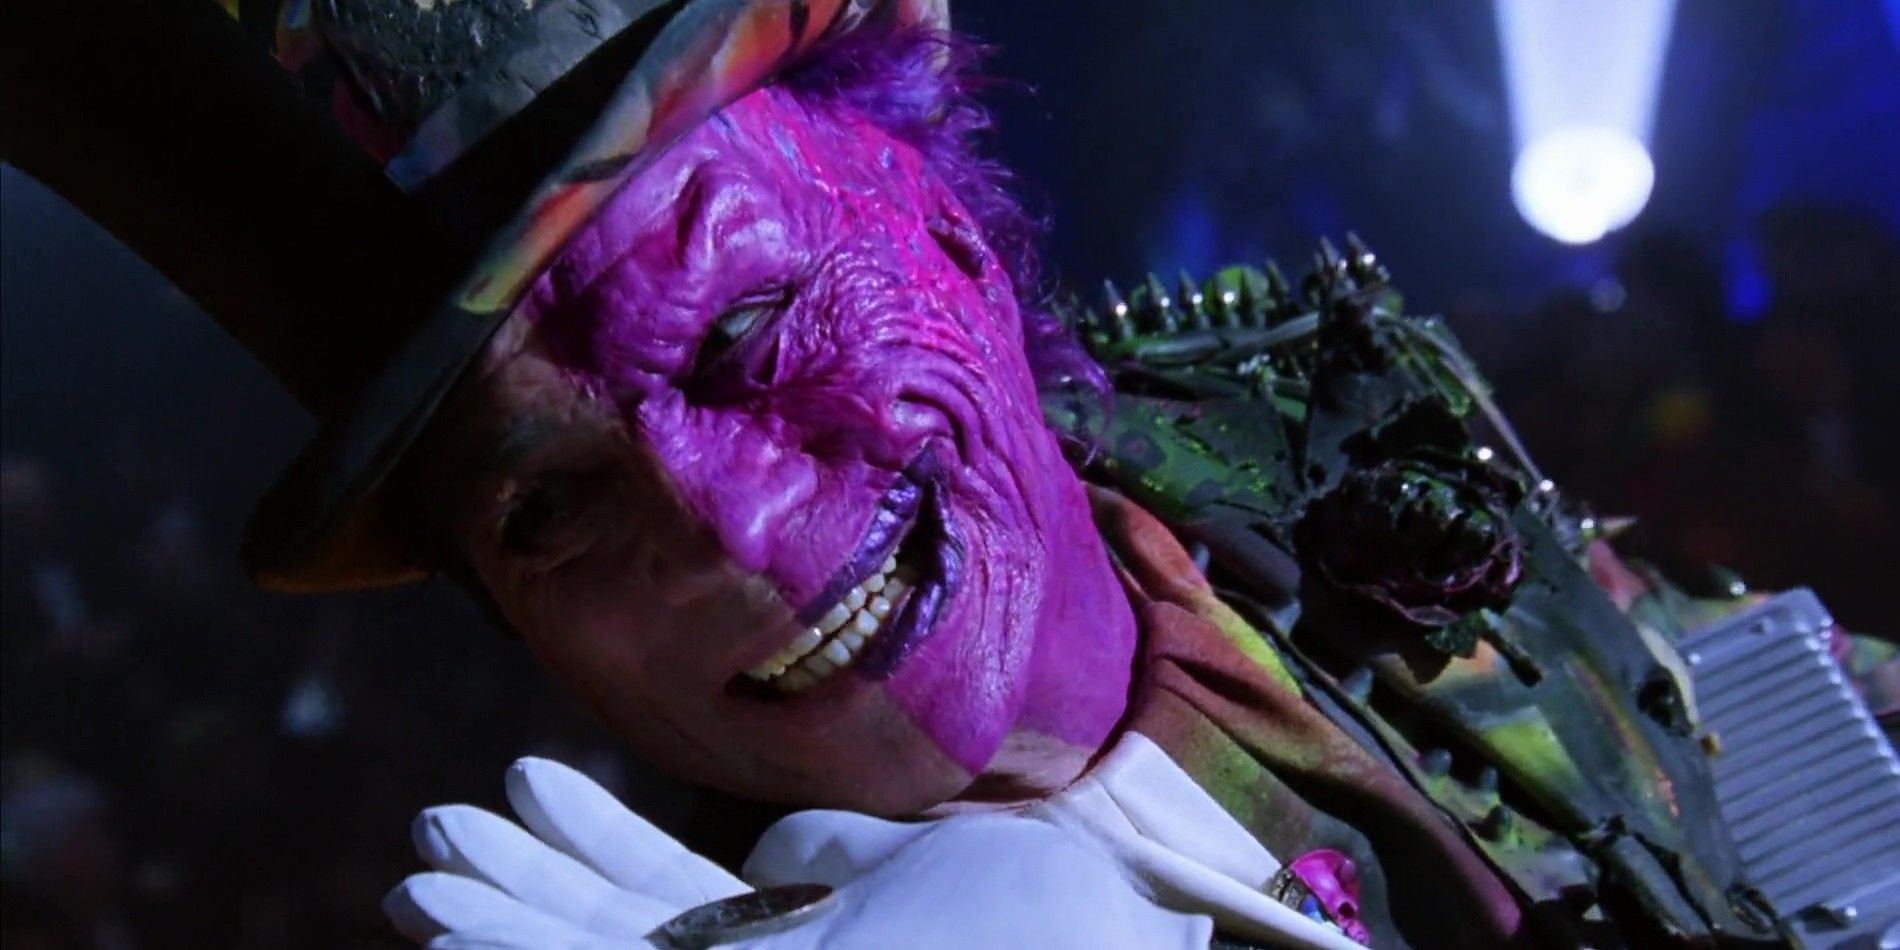 Tommy Lee Jones as Two-Face smiling in Batman Forever